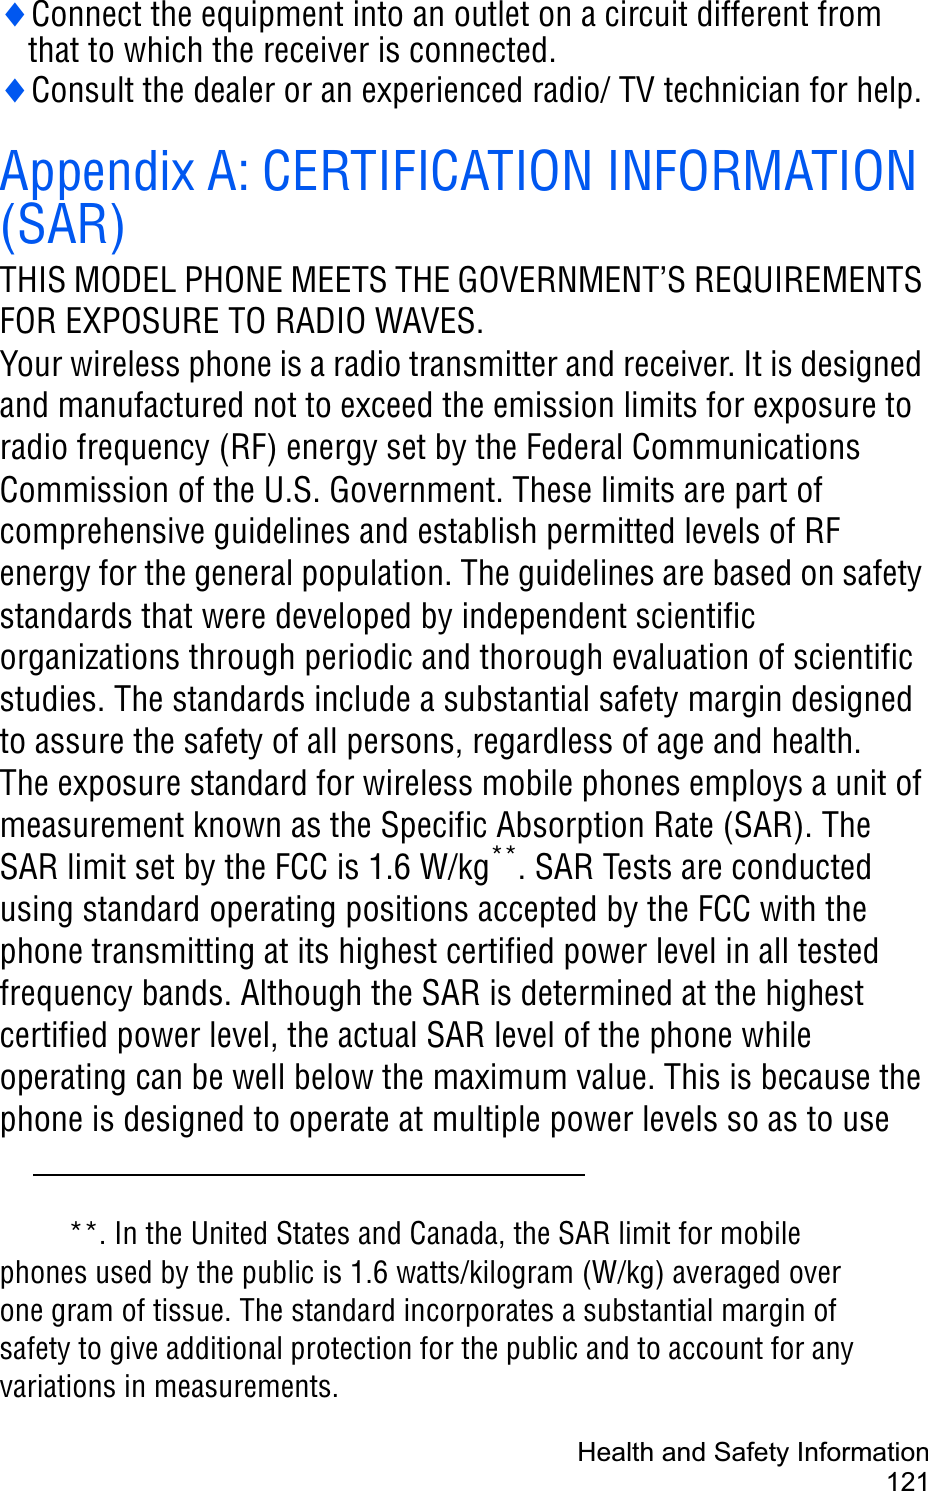 Health and Safety Information121iConnect the equipment into an outlet on a circuit different from that to which the receiver is connected.iConsult the dealer or an experienced radio/ TV technician for help.Appendix A: CERTIFICATION INFORMATION (SAR)THIS MODEL PHONE MEETS THE GOVERNMENT’S REQUIREMENTS FOR EXPOSURE TO RADIO WAVES.Your wireless phone is a radio transmitter and receiver. It is designed and manufactured not to exceed the emission limits for exposure to radio frequency (RF) energy set by the Federal Communications Commission of the U.S. Government. These limits are part of comprehensive guidelines and establish permitted levels of RF energy for the general population. The guidelines are based on safety standards that were developed by independent scientific organizations through periodic and thorough evaluation of scientific studies. The standards include a substantial safety margin designed to assure the safety of all persons, regardless of age and health. The exposure standard for wireless mobile phones employs a unit of measurement known as the Specific Absorption Rate (SAR). The SAR limit set by the FCC is 1.6 W/kg**. SAR Tests are conducted using standard operating positions accepted by the FCC with the phone transmitting at its highest certified power level in all tested frequency bands. Although the SAR is determined at the highest certified power level, the actual SAR level of the phone while operating can be well below the maximum value. This is because the phone is designed to operate at multiple power levels so as to use **. In the United States and Canada, the SAR limit for mobile phones used by the public is 1.6 watts/kilogram (W/kg) averaged over one gram of tissue. The standard incorporates a substantial margin of safety to give additional protection for the public and to account for any variations in measurements.